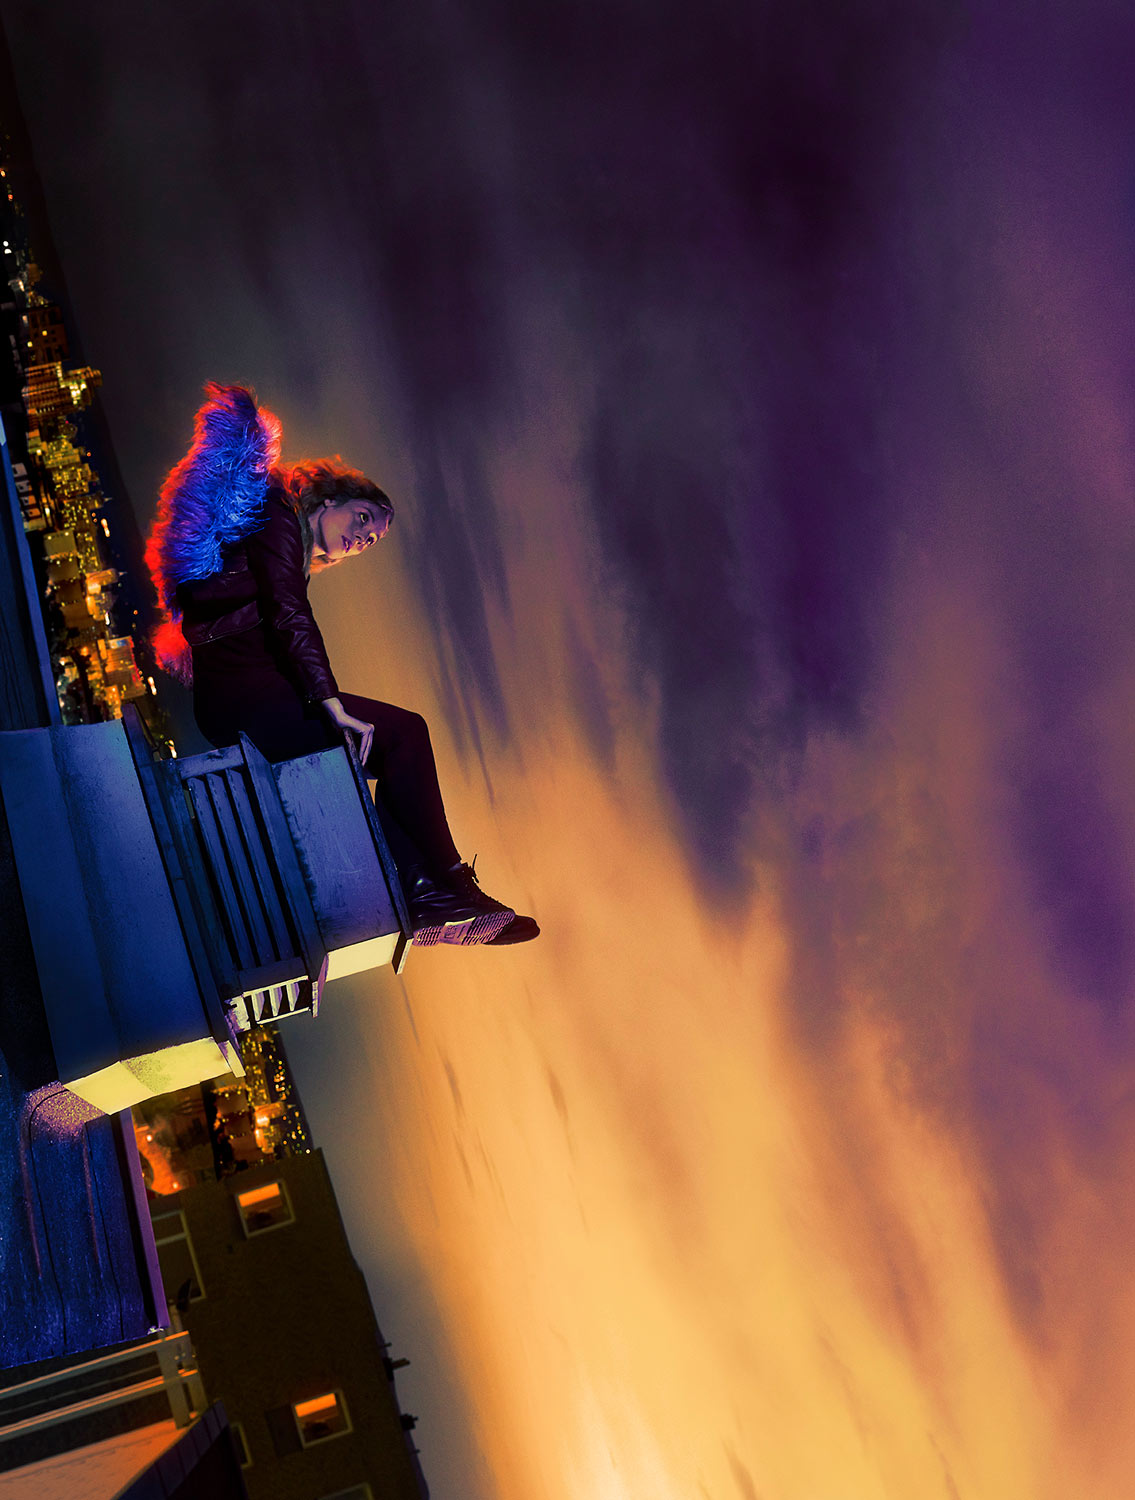 Norwegian artist Gabrielle sits on the edge of a chimney overlooking the city of Oslo. Used as cover art for her album called Nattergal  by: håvard schei